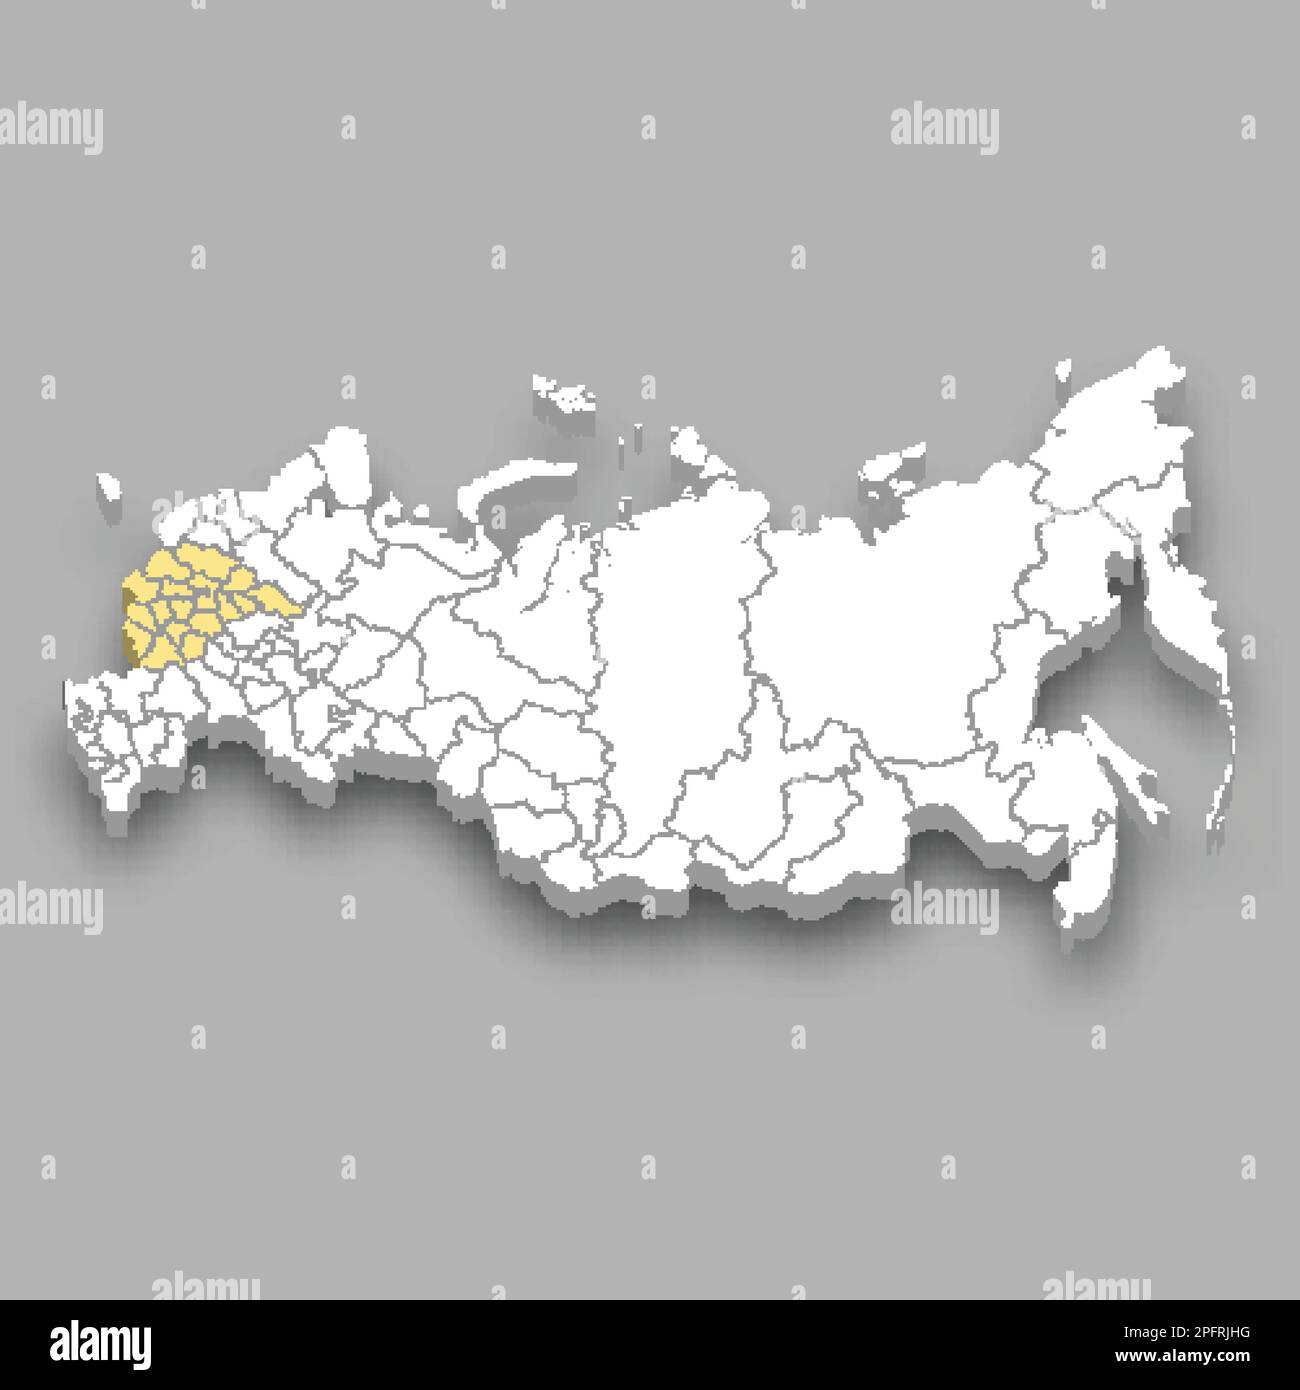 Central region location within Russia 3d isometric map Stock Vector